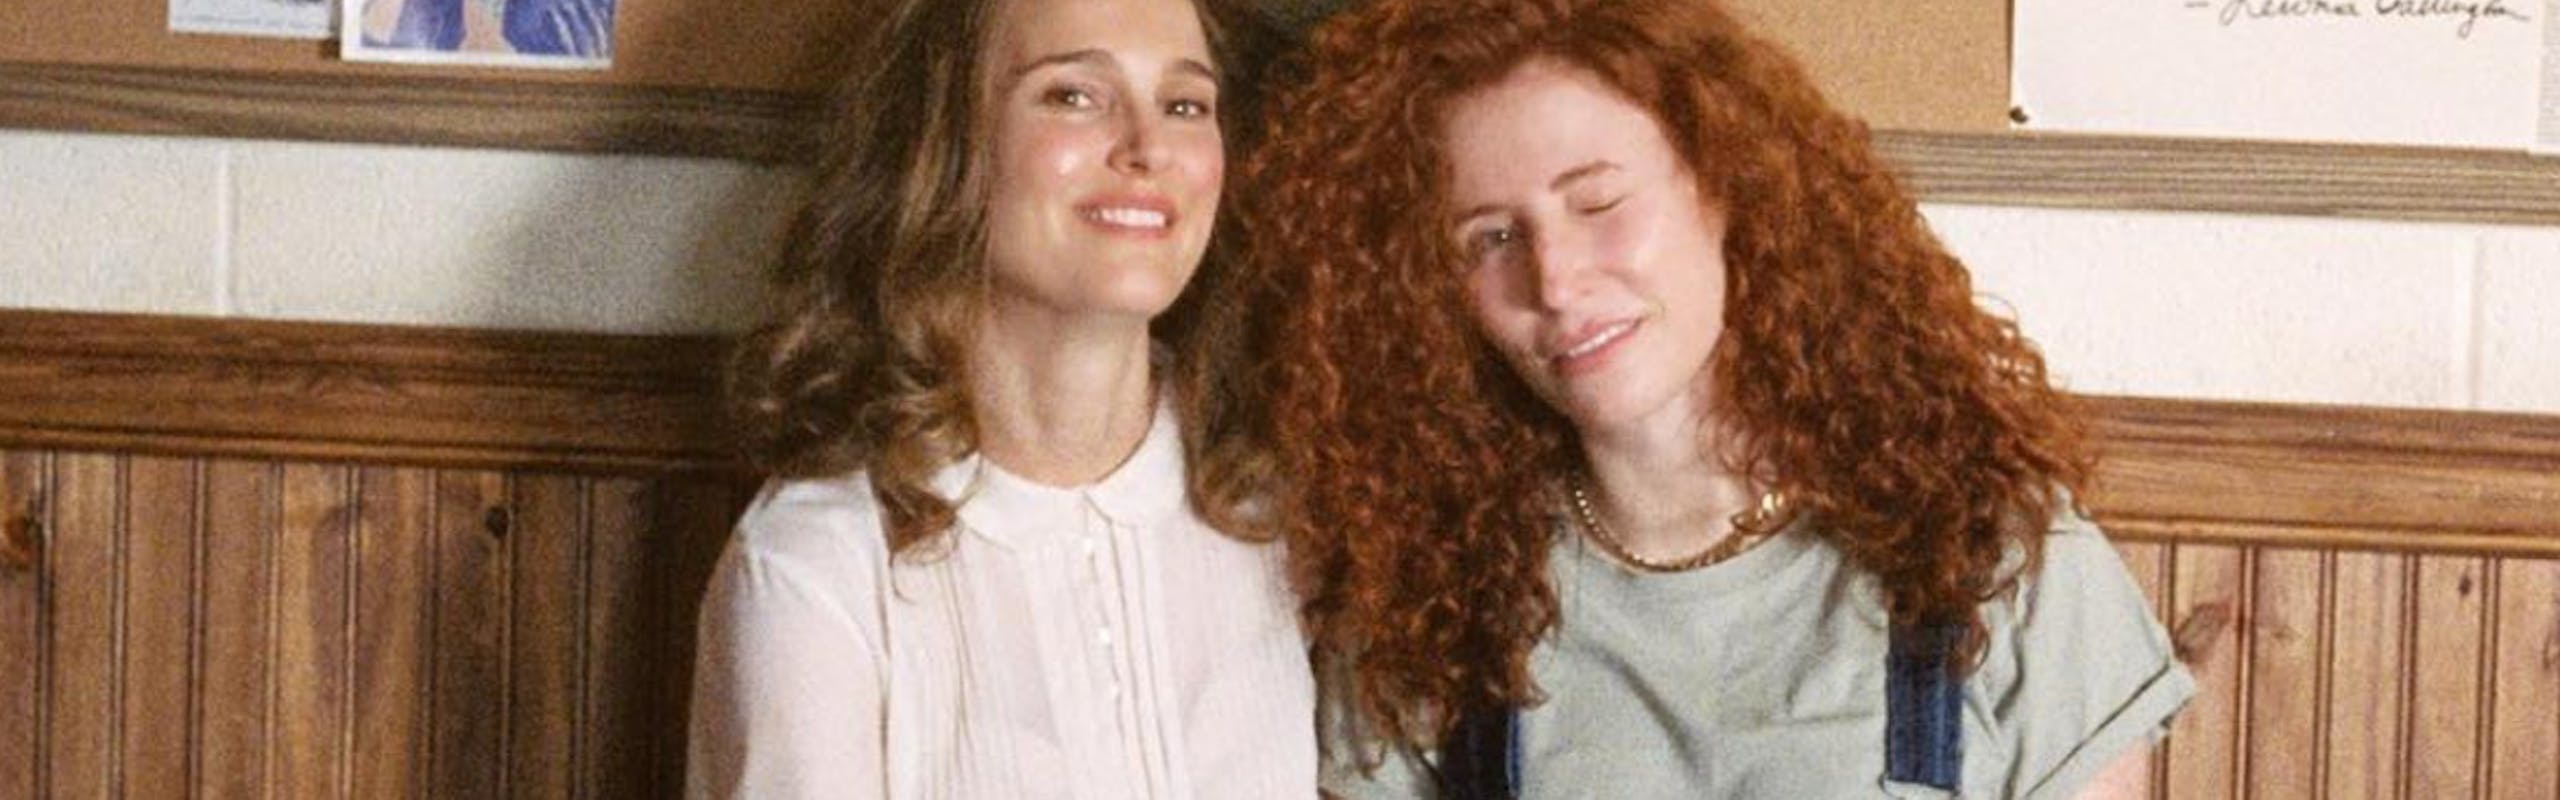 natalie portman and alma har'el on the set of lady in the lake